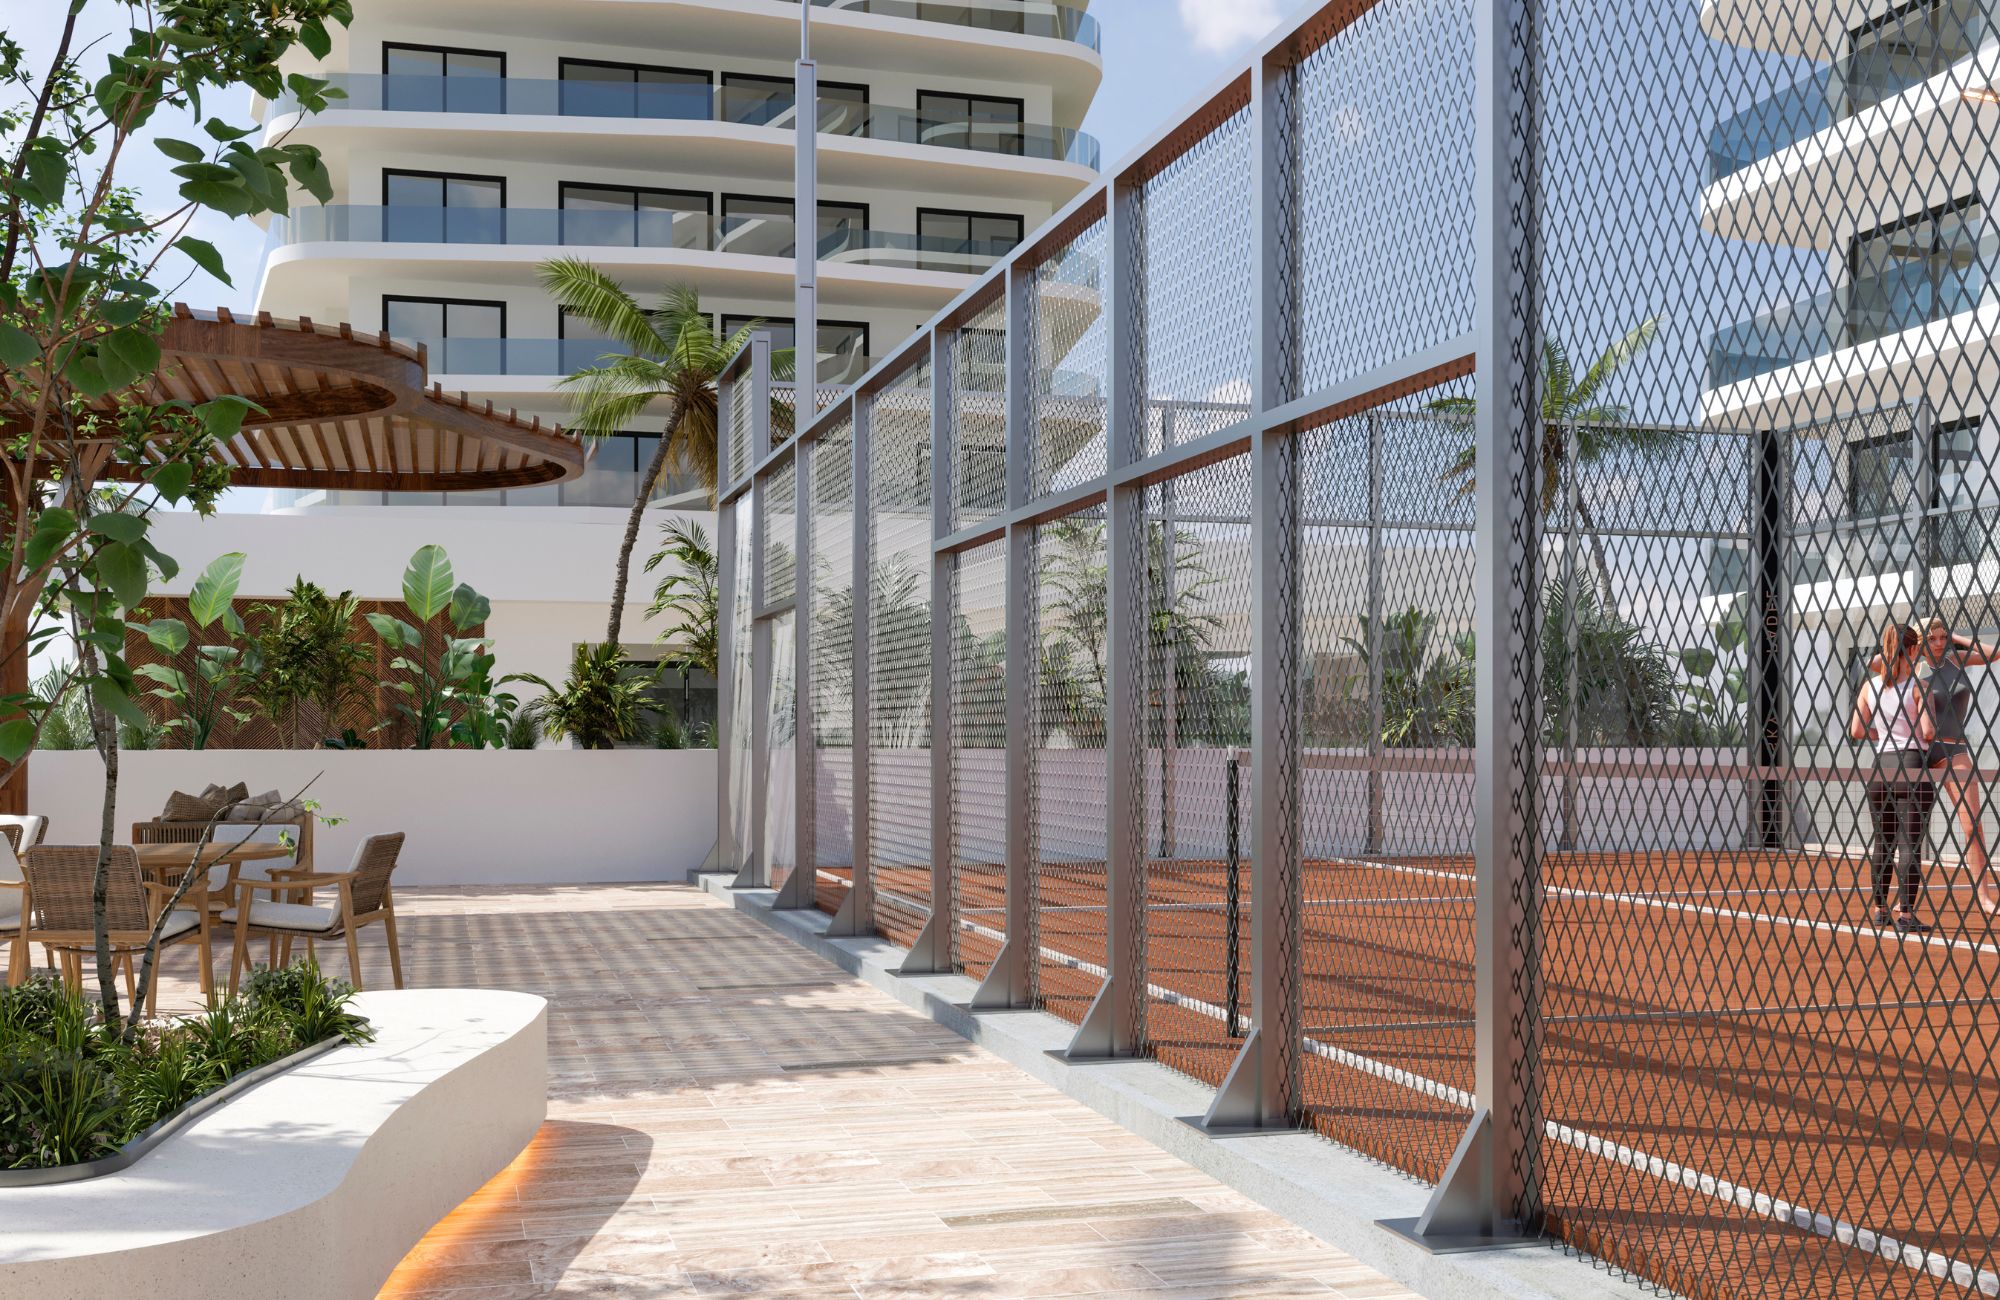 Condominium with children&amp;#39;s games, children&amp;#39;s party room, swimming pool, pre-construction, Colosio Boulevard for sale, Cancún.